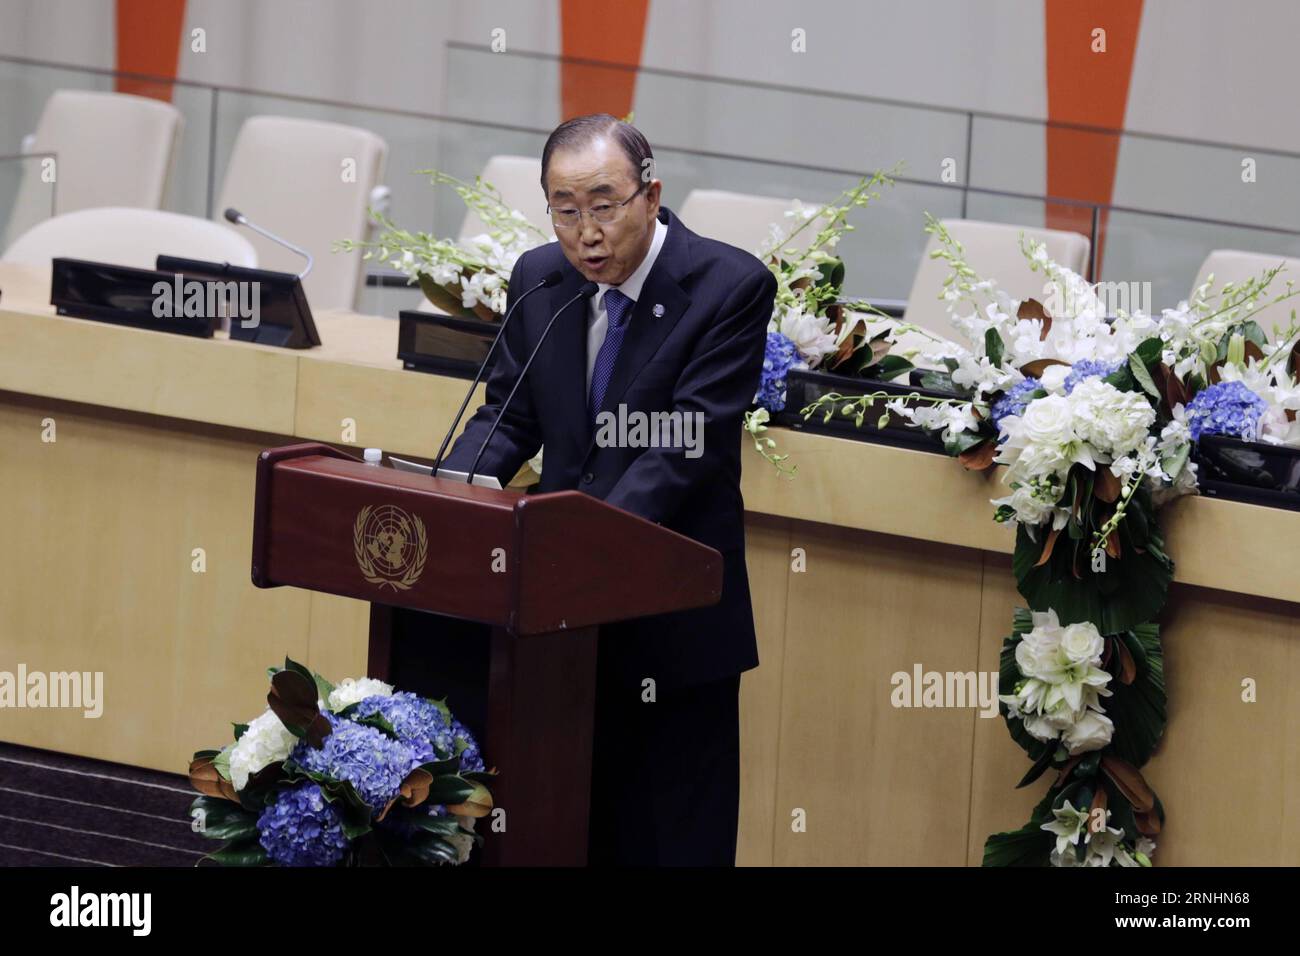 UNITED NATIONS, Nov. 29, 2016 -- United Nations Secretary-General Ban Ki-moon addresses a memorial for Joseph Verner Reed at the United Nations headquarters in New York, the United States, Nov. 29, 2016. The United Nations on Tuesday held a memorial to pay tribute to Joseph Verner Reed, a U.S. veteran diplomat who served in 1987 as the UN under-secretary-general to head the then UN Department of Political and General Assembly Affairs. ) (gj) UN-NEW YORK-JOSEPH REED-MEMORIAL LixMuzi PUBLICATIONxNOTxINxCHN   United Nations Nov 29 2016 United Nations Secretary General Ban KI Moon addresses a Memo Stock Photo